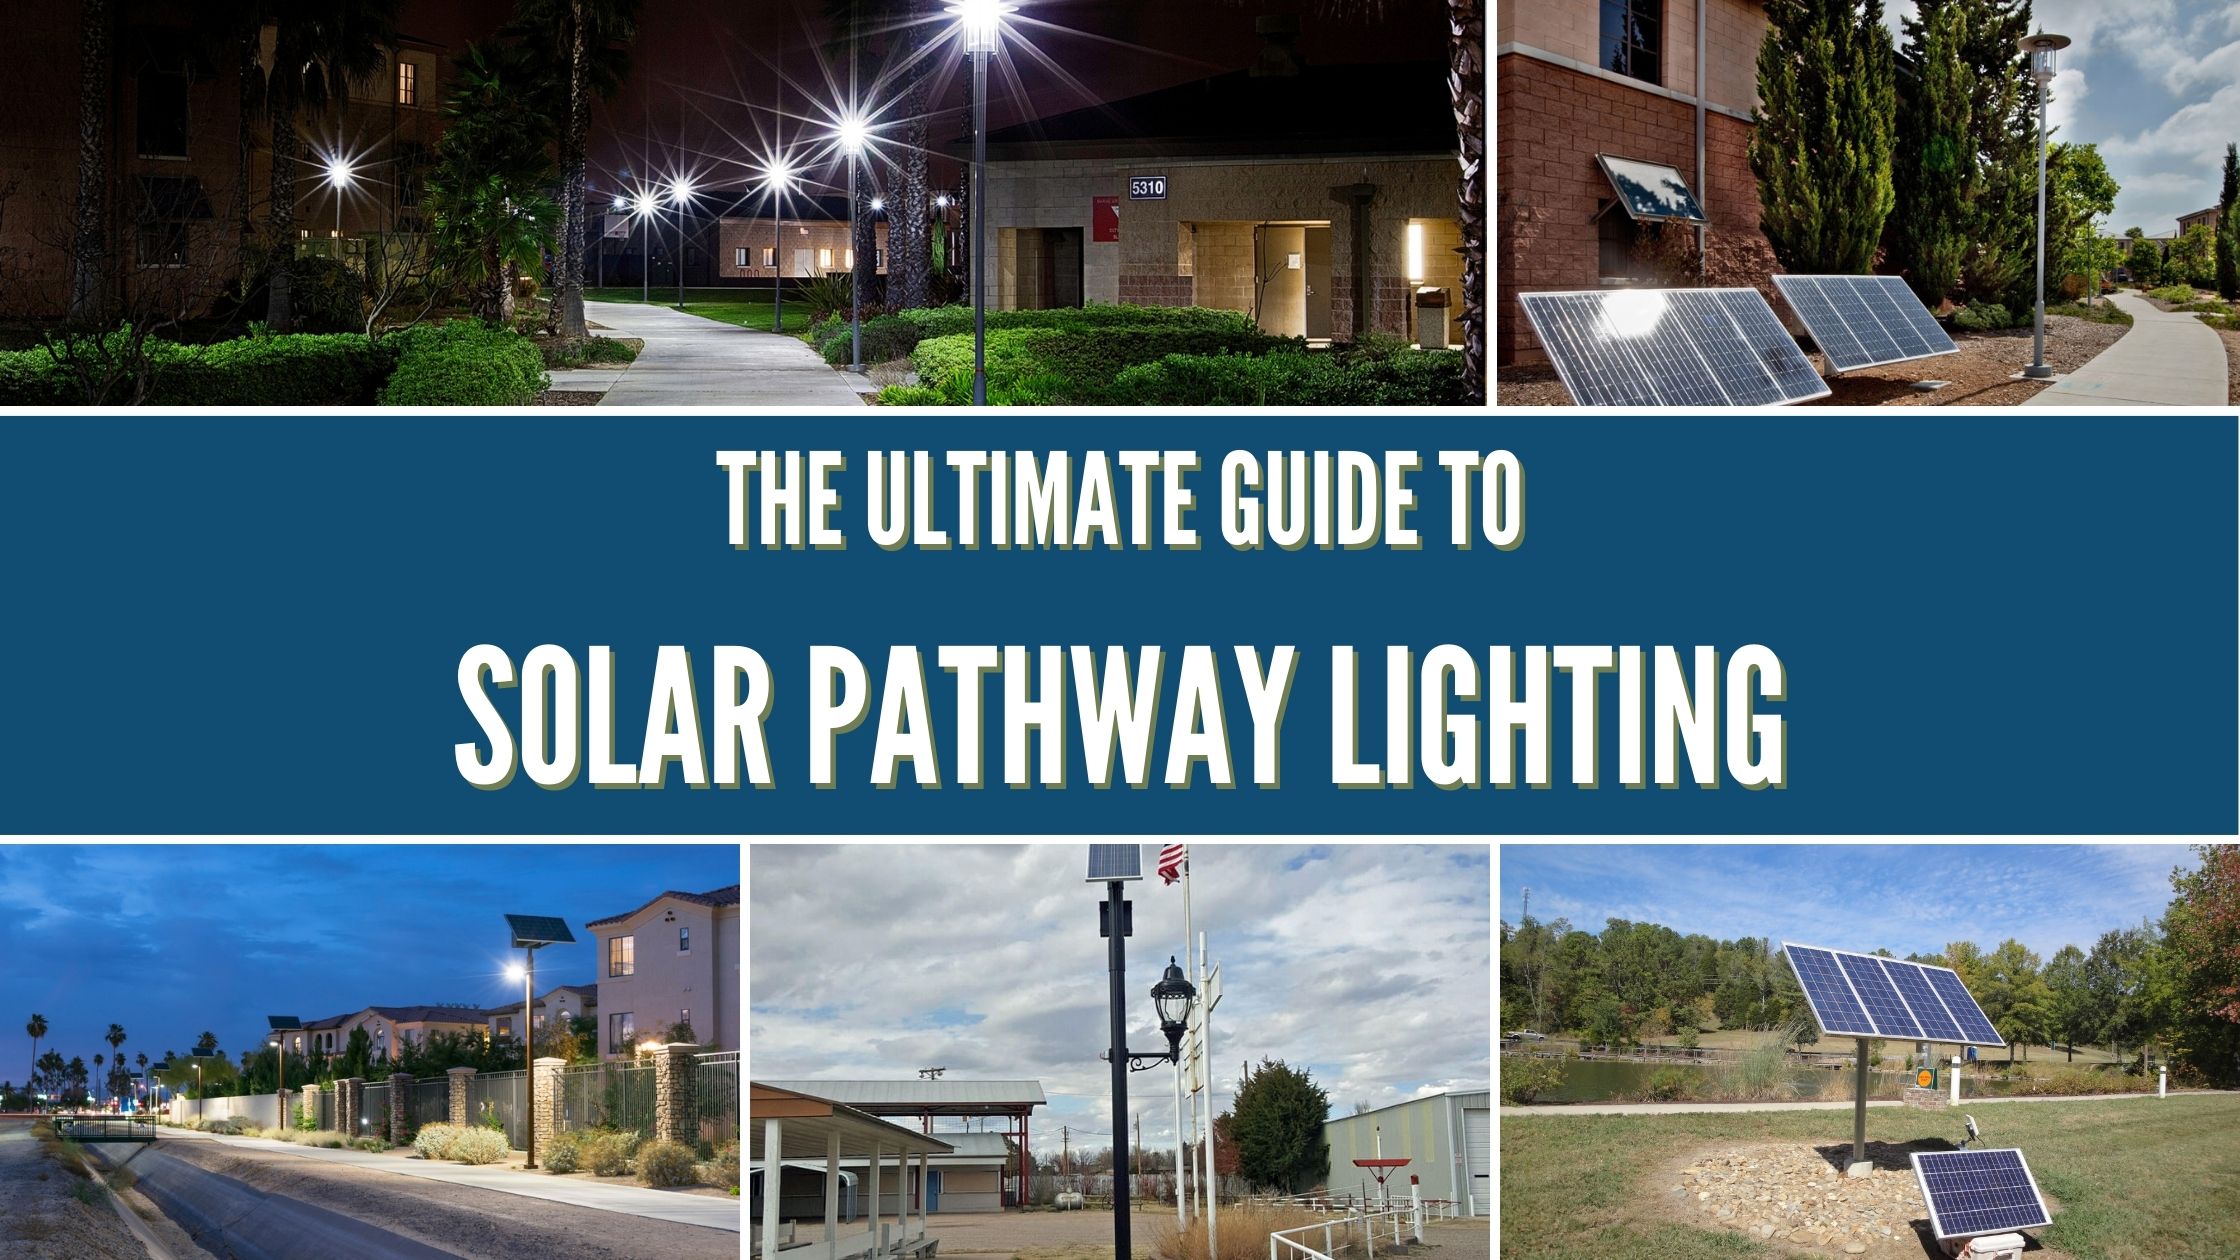 The Ultimate Guide to Solar Pathway Lighting